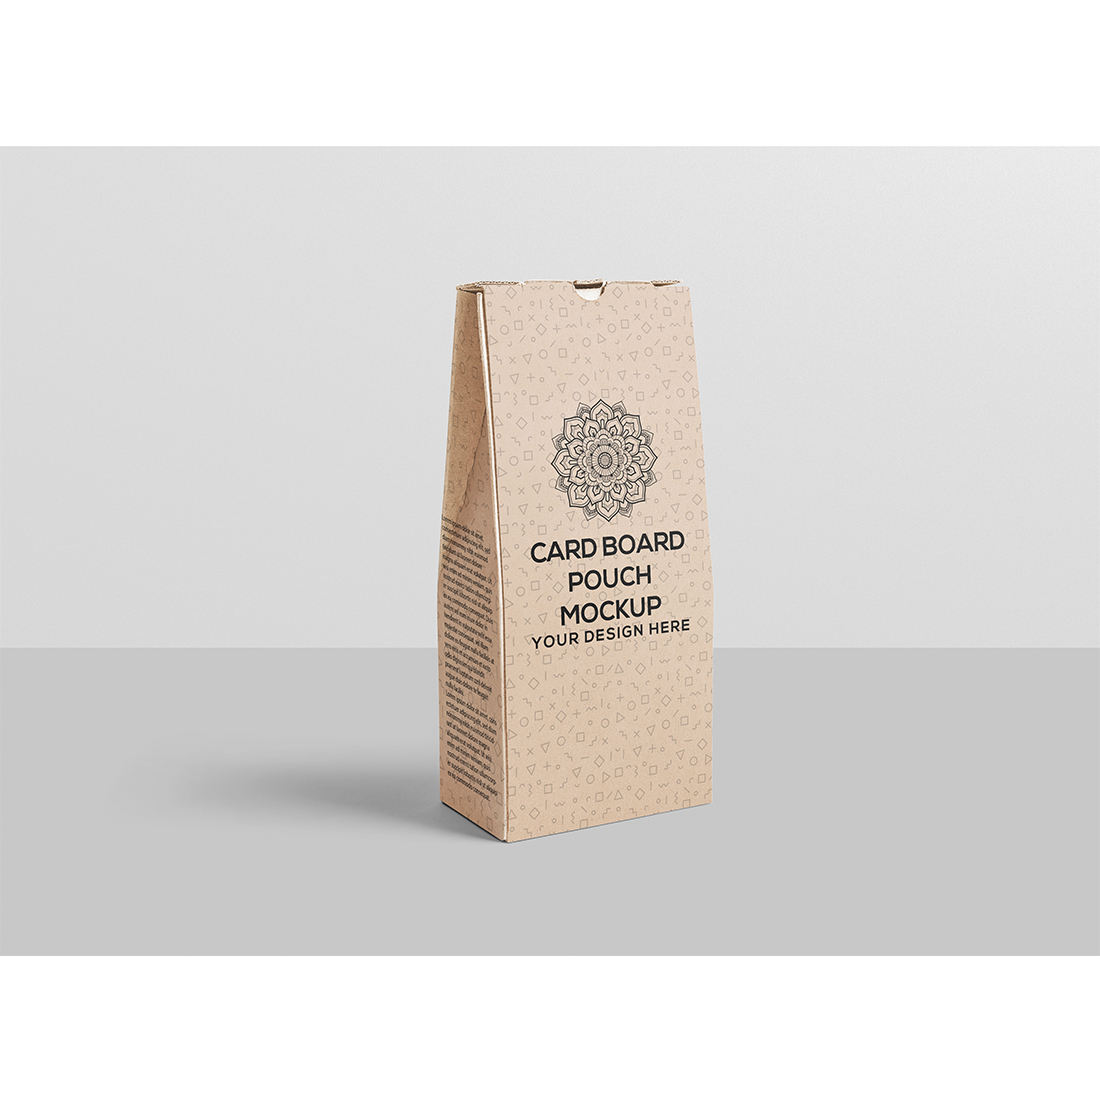 Cardboard Pouch Mockup cover image.